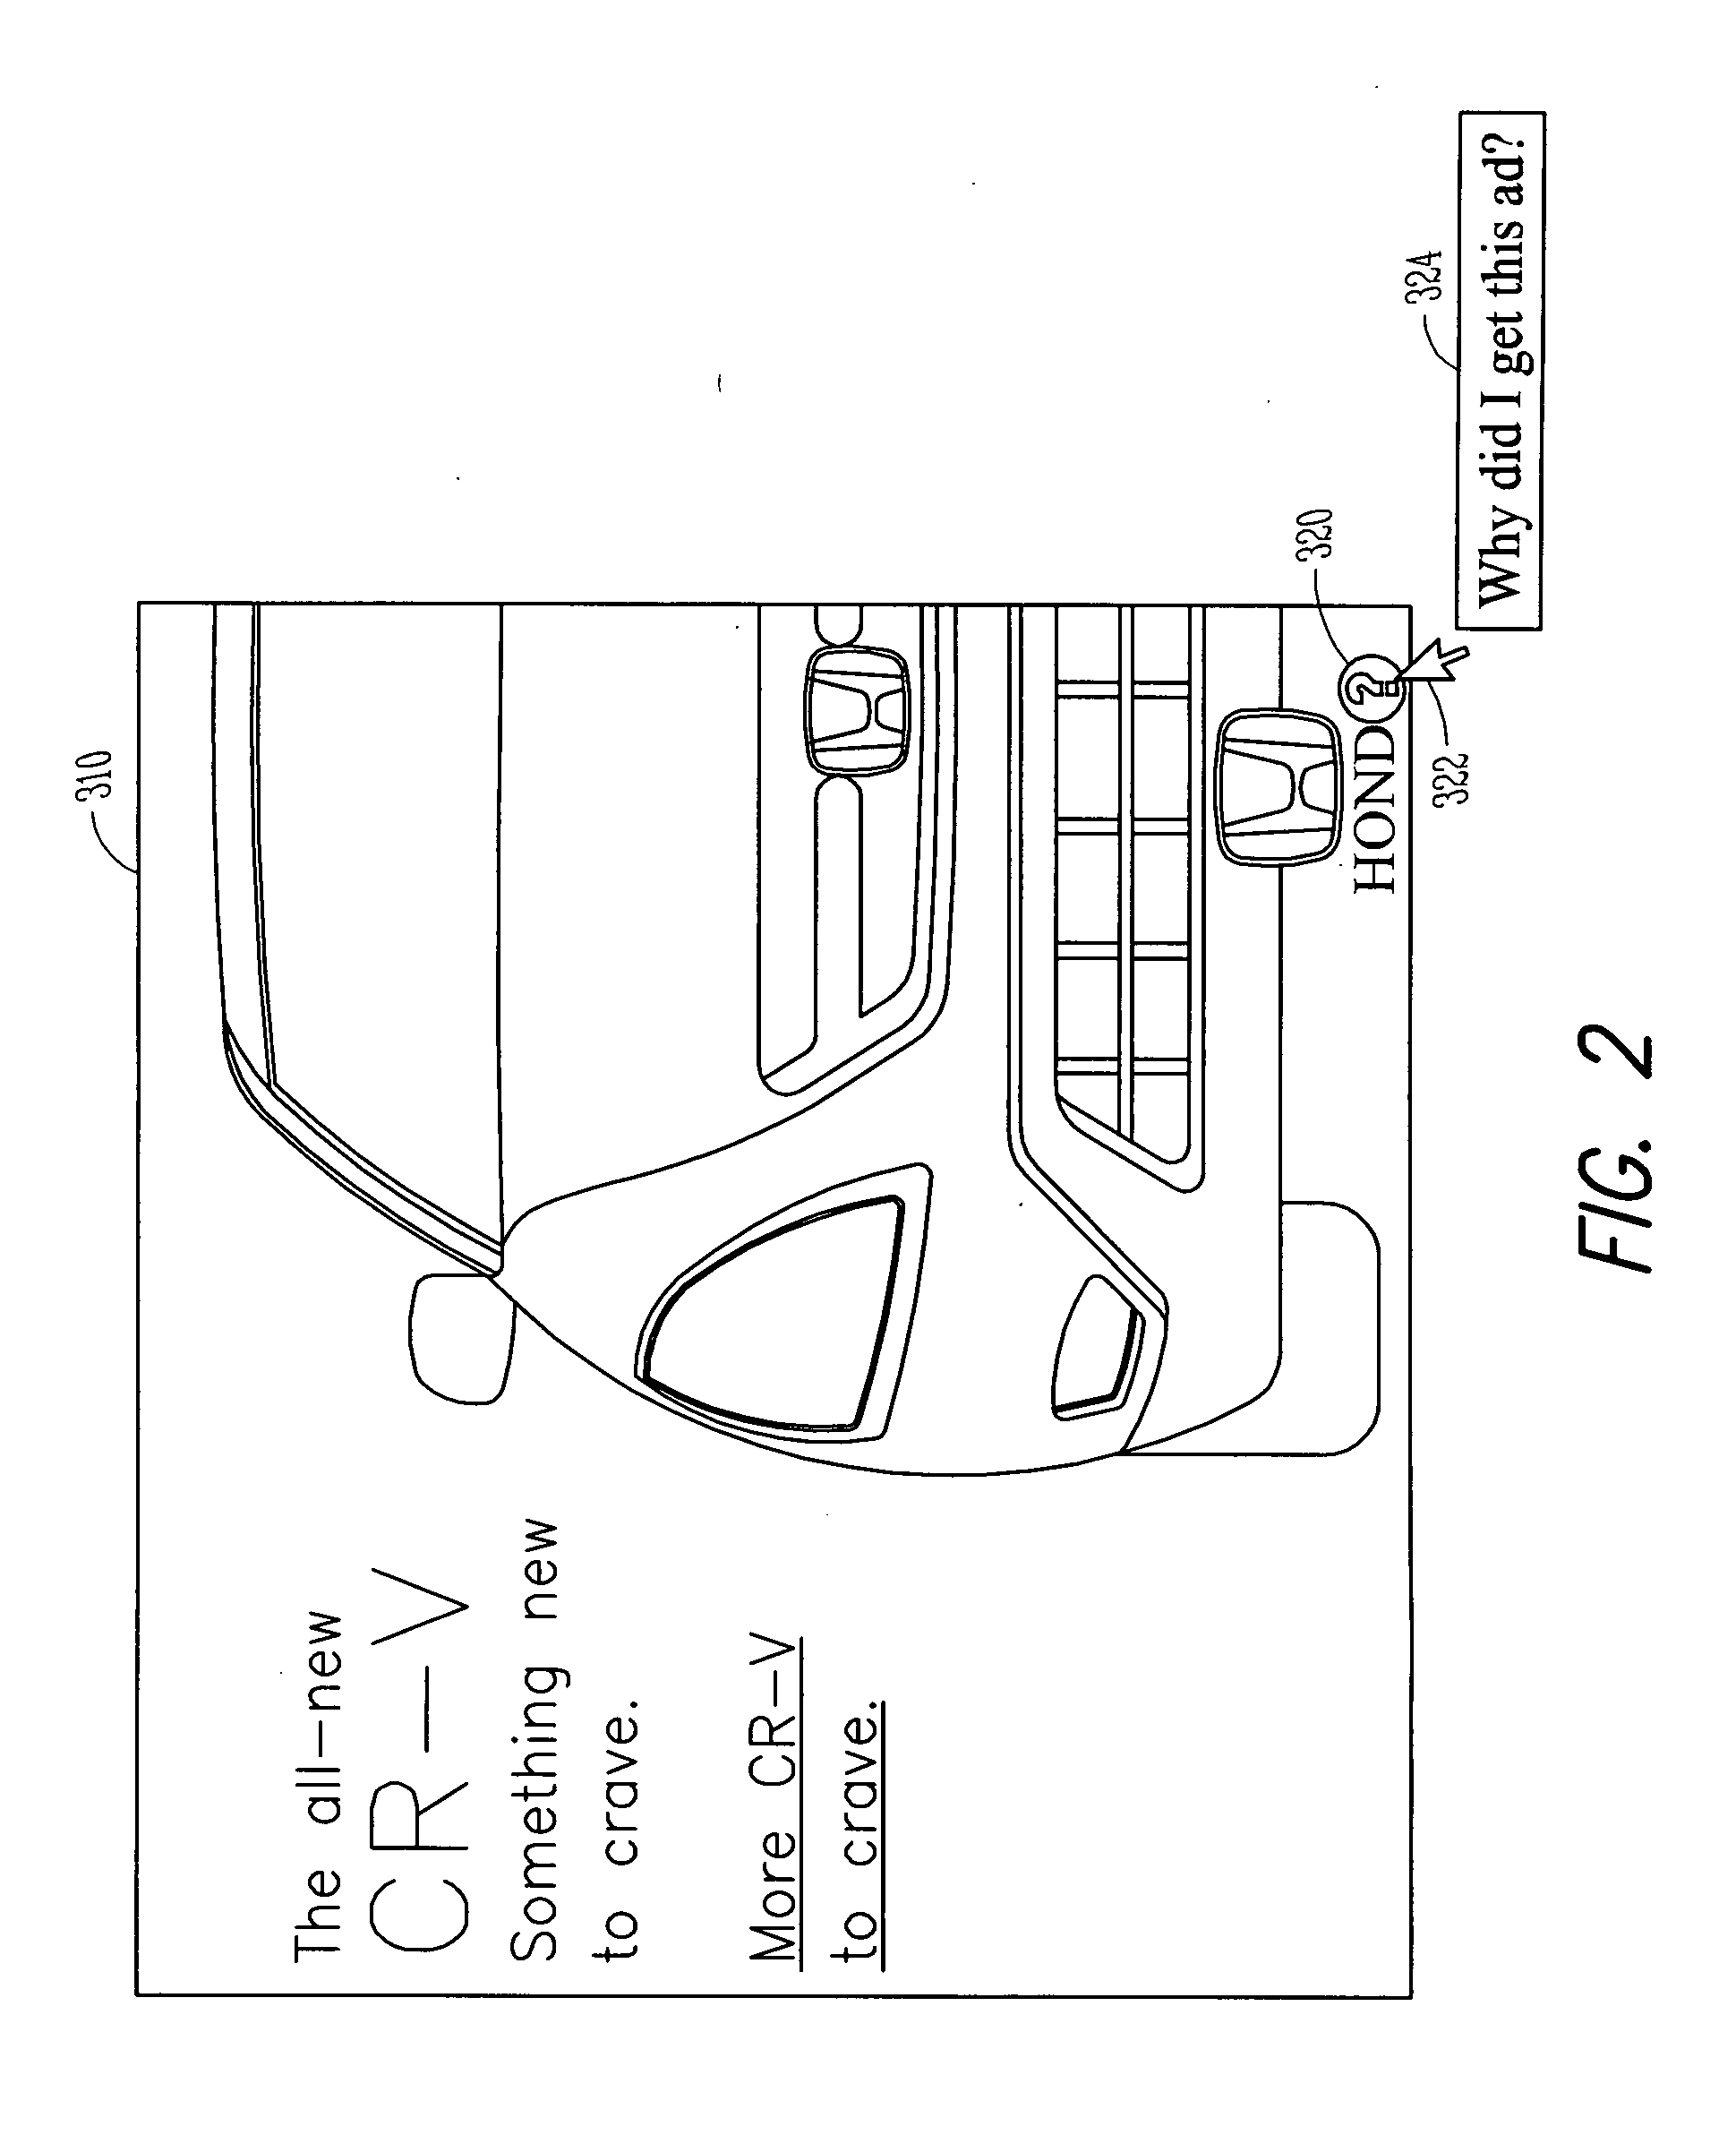 System and method for contextual advertising and merchandizing based on user configurable preferences